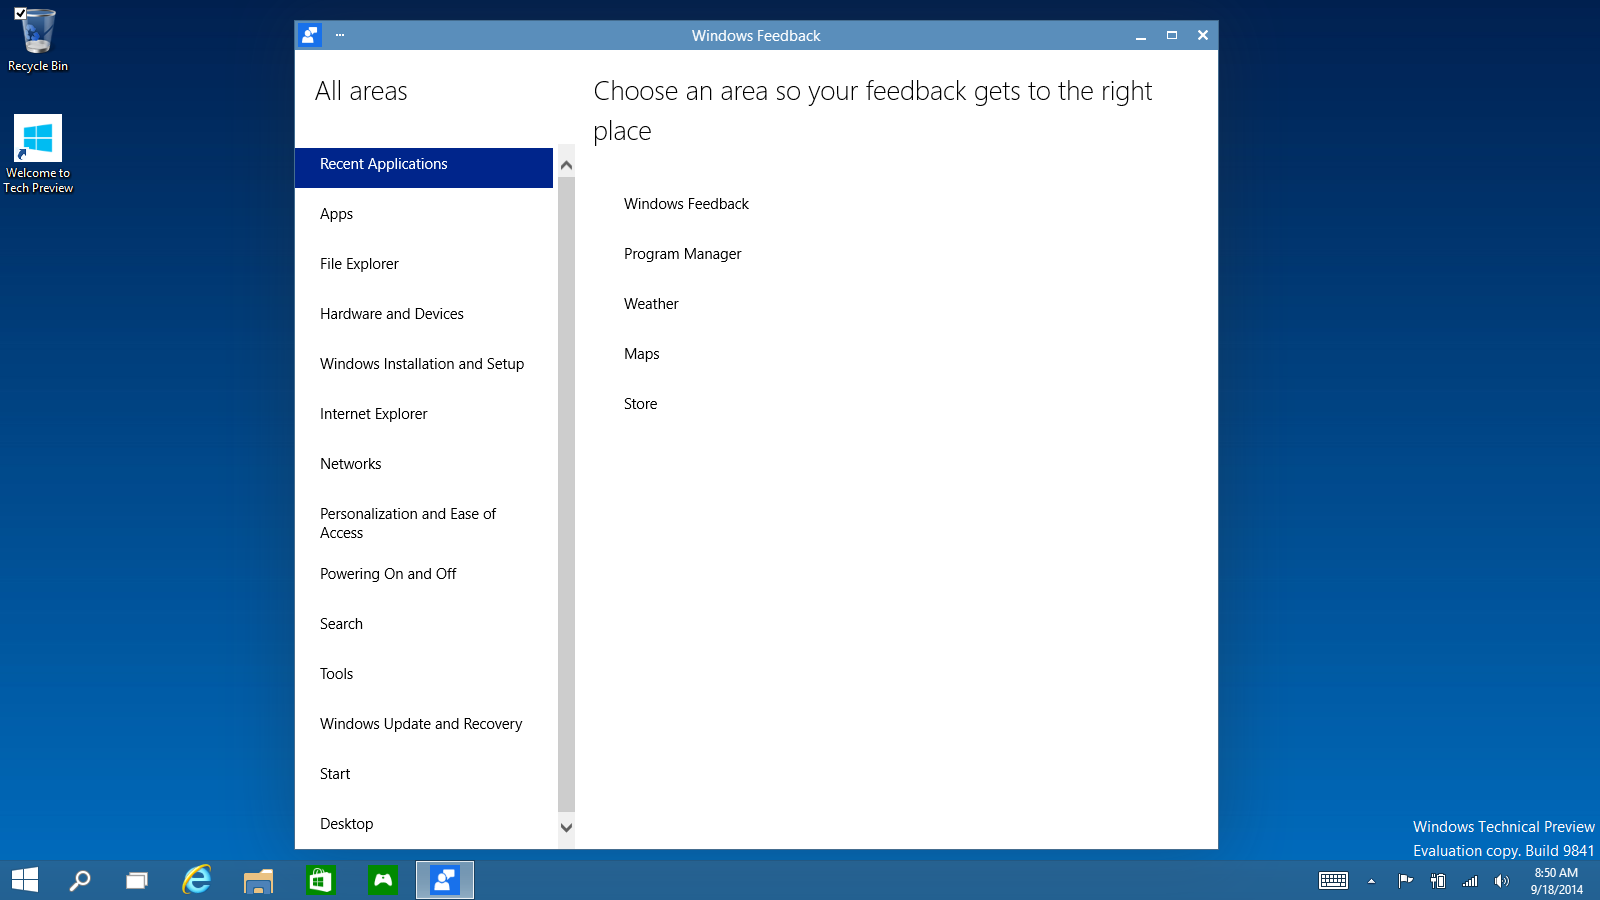 windows 10 pro insider preview to full version download